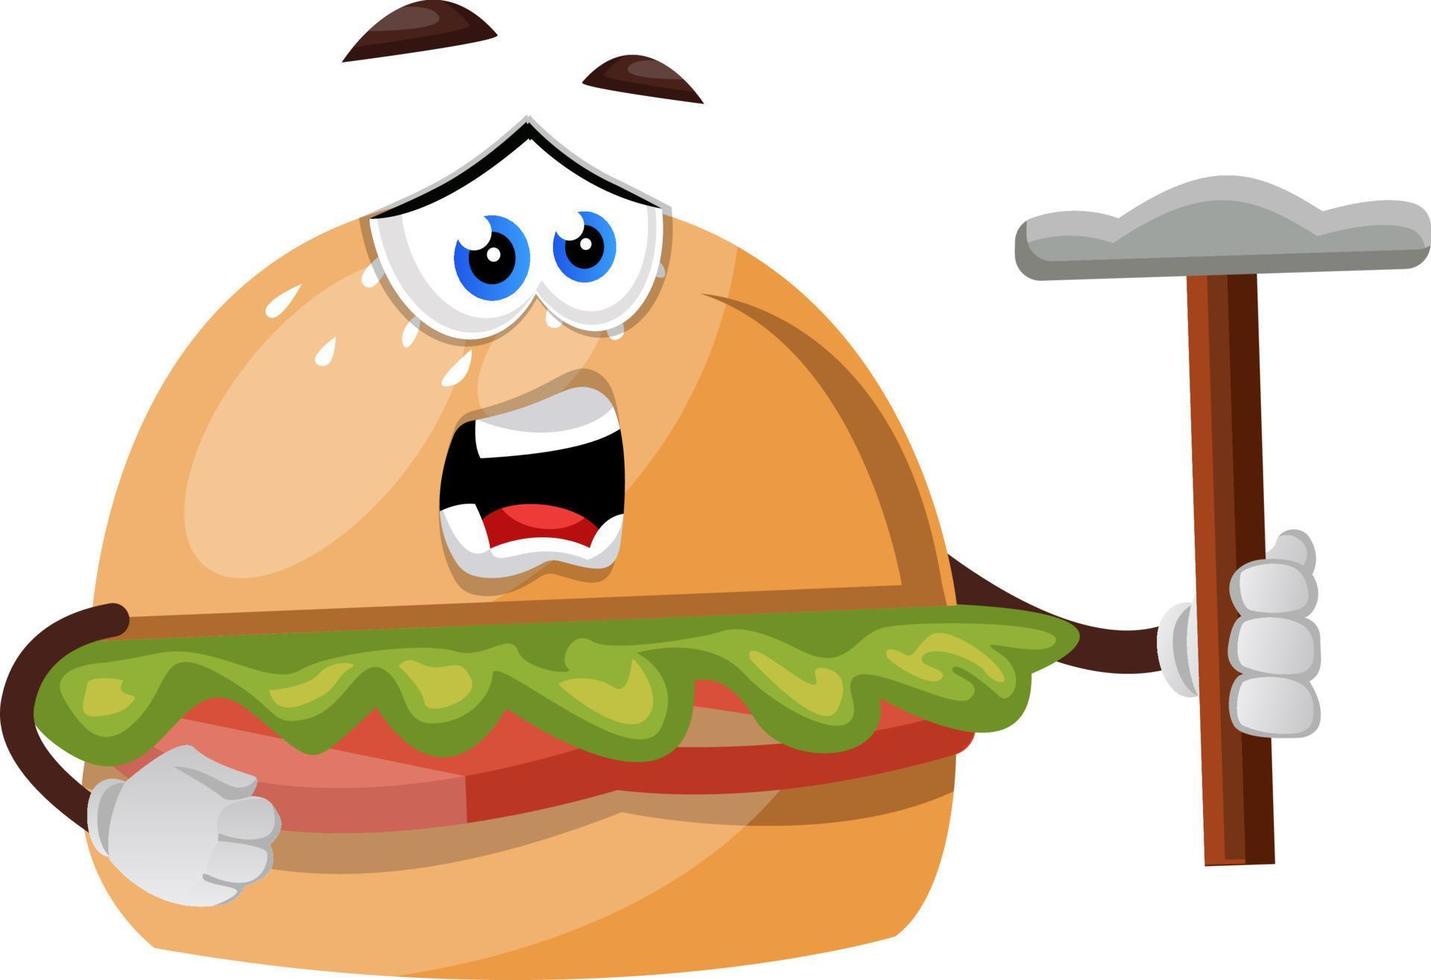 Burger with hammer, illustration, vector on white background.